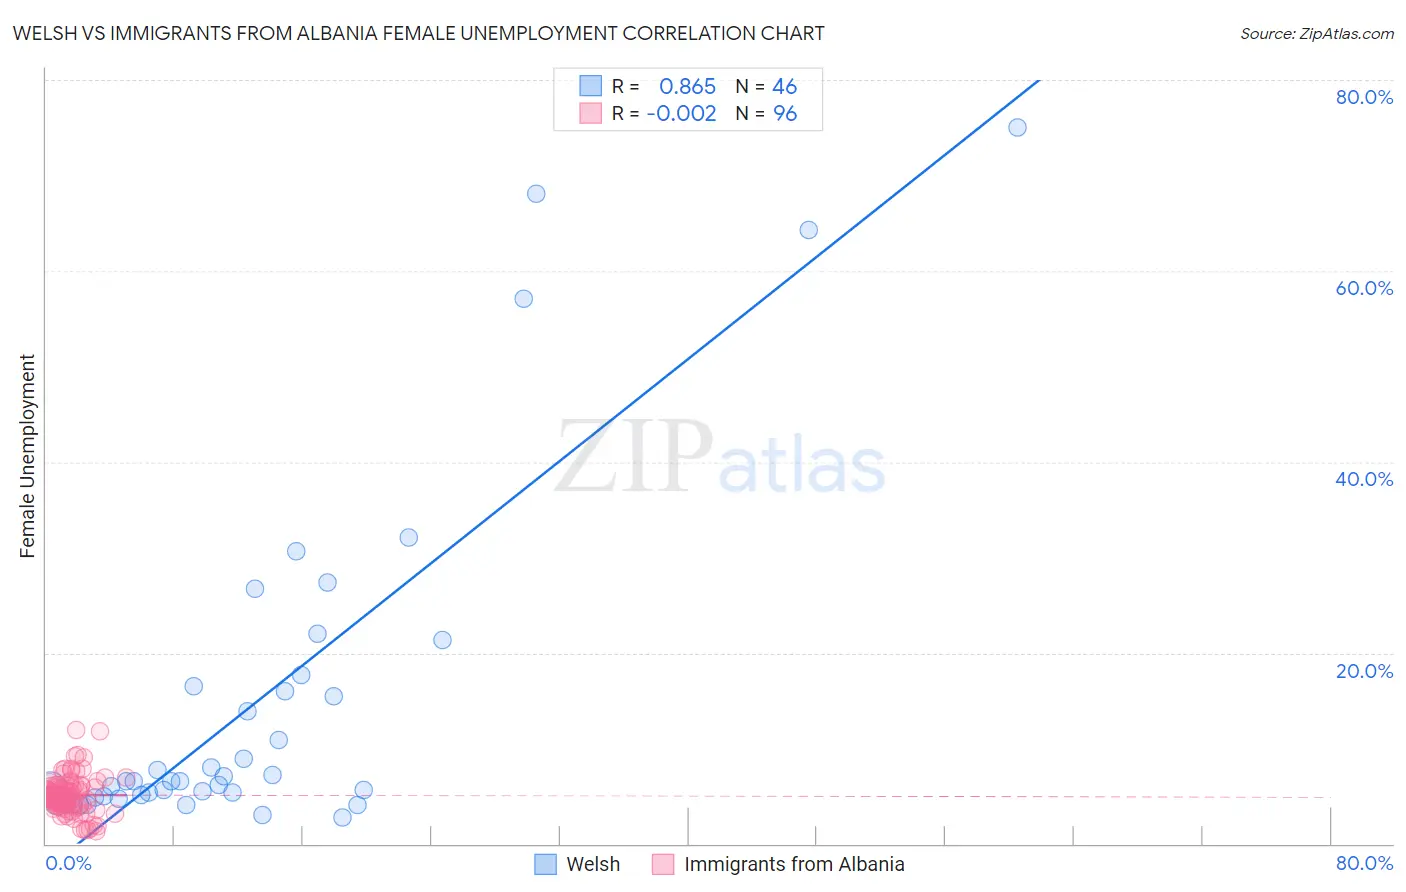 Welsh vs Immigrants from Albania Female Unemployment